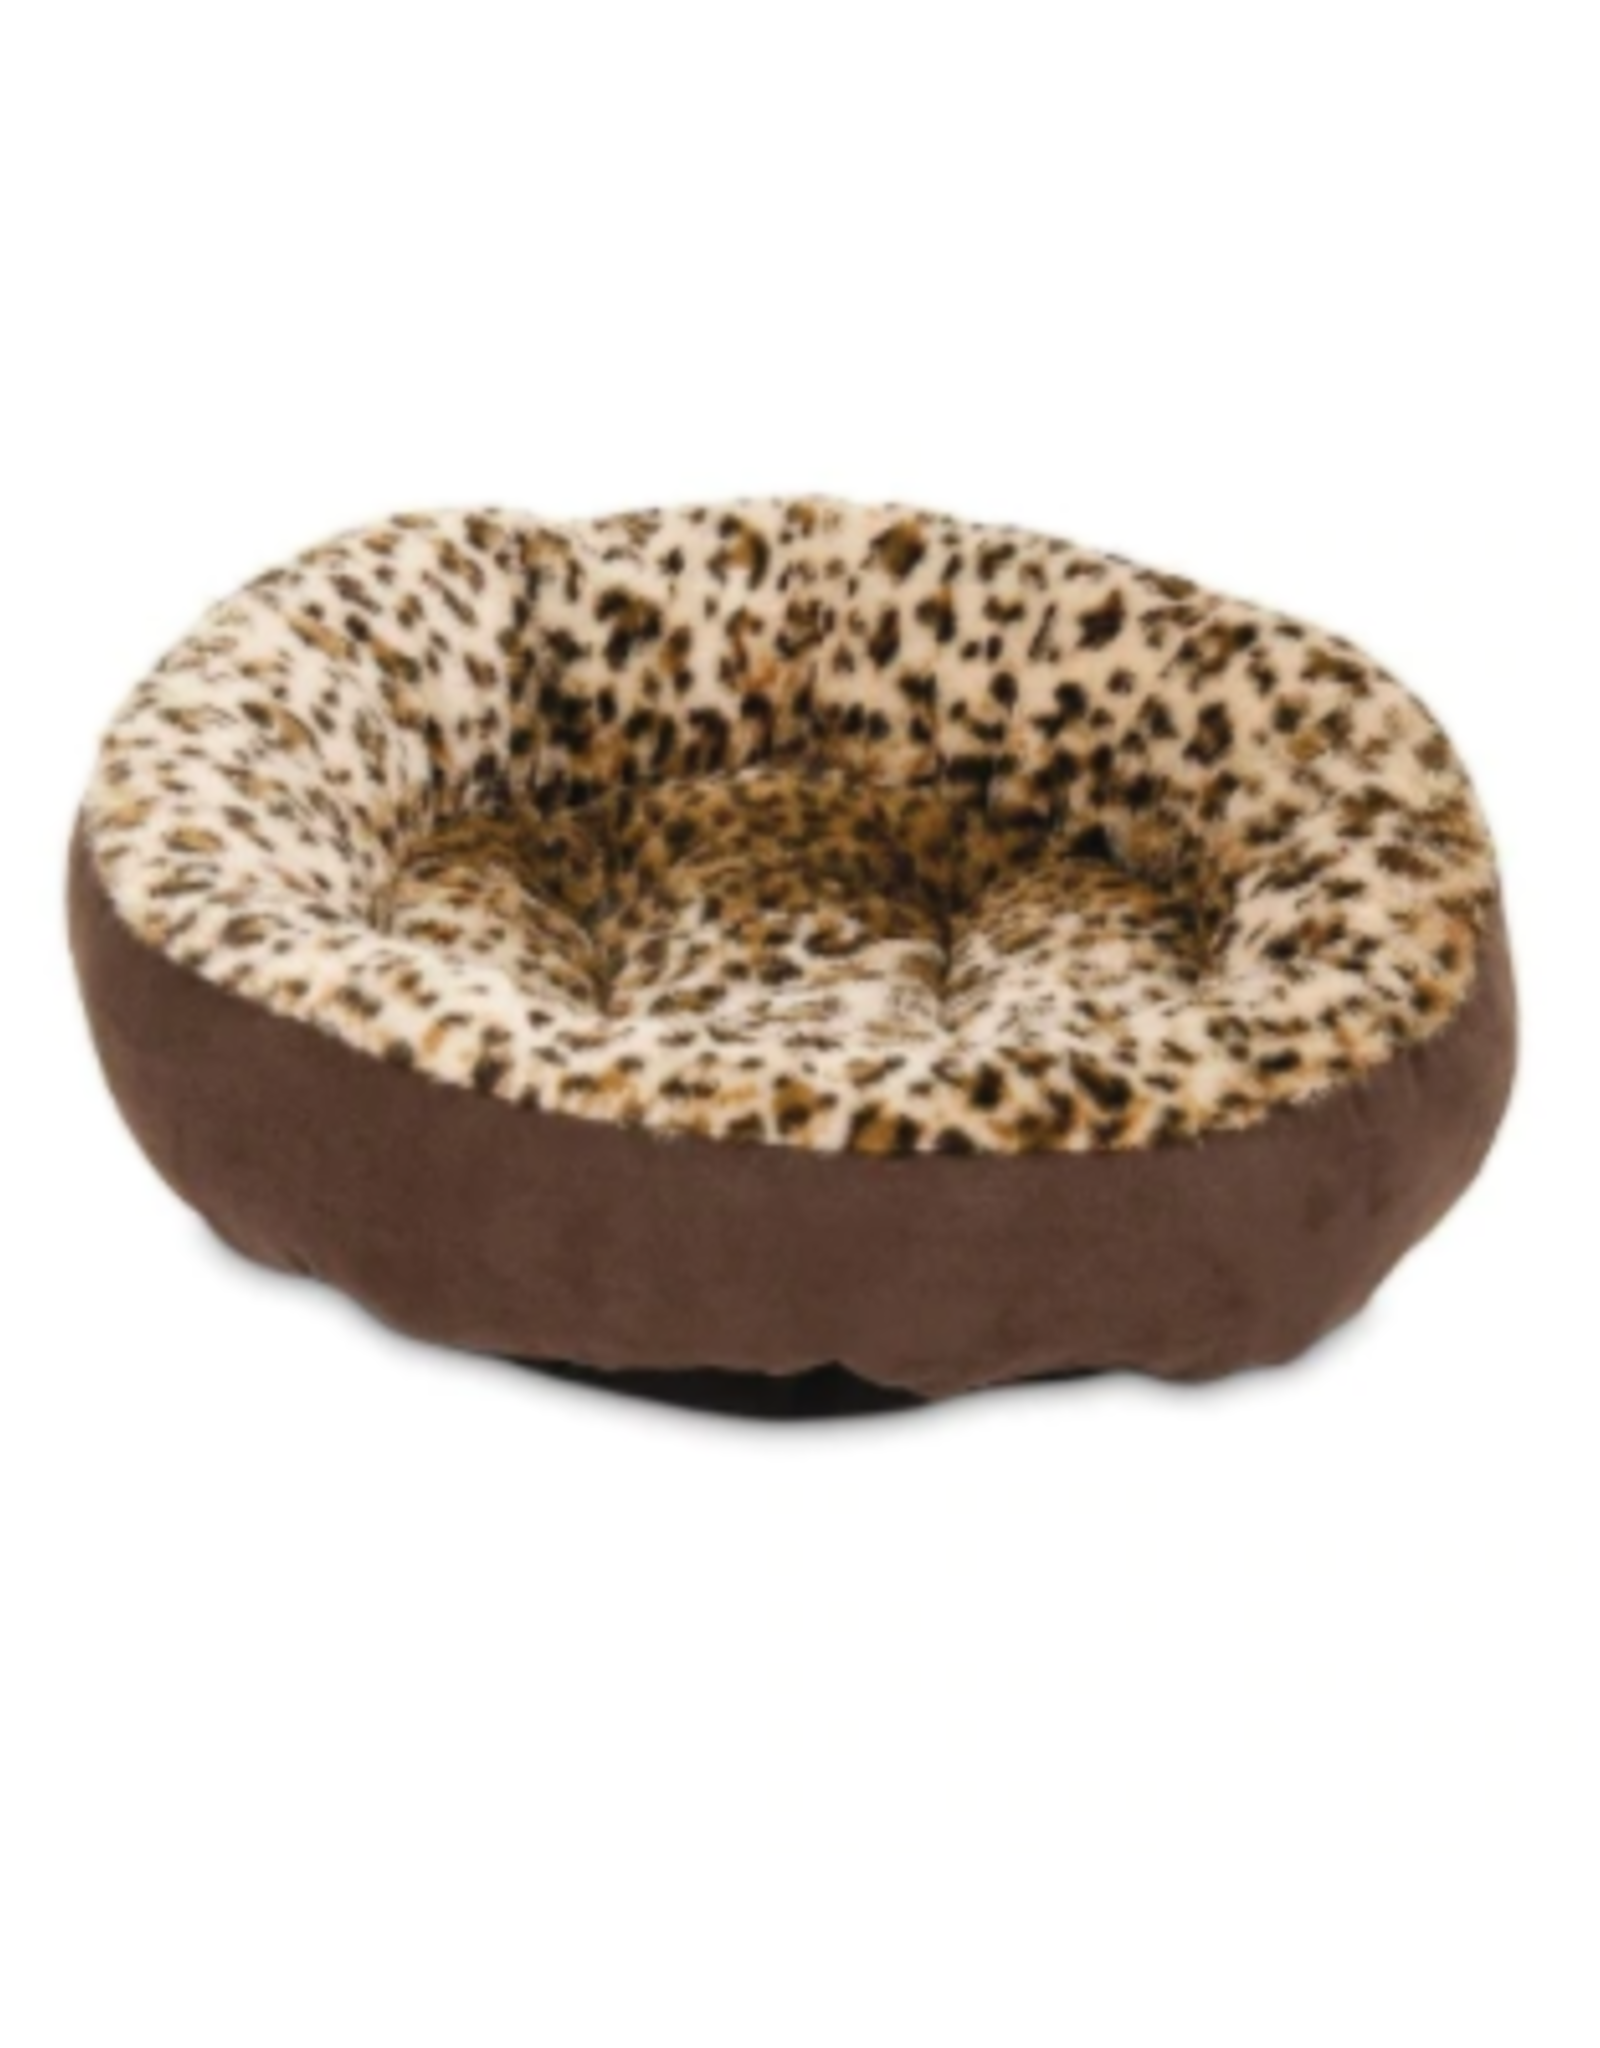 DOSKOCIL MANUFACTURING CO ROUND BOLSTER ANIMAL PRINT 18IN